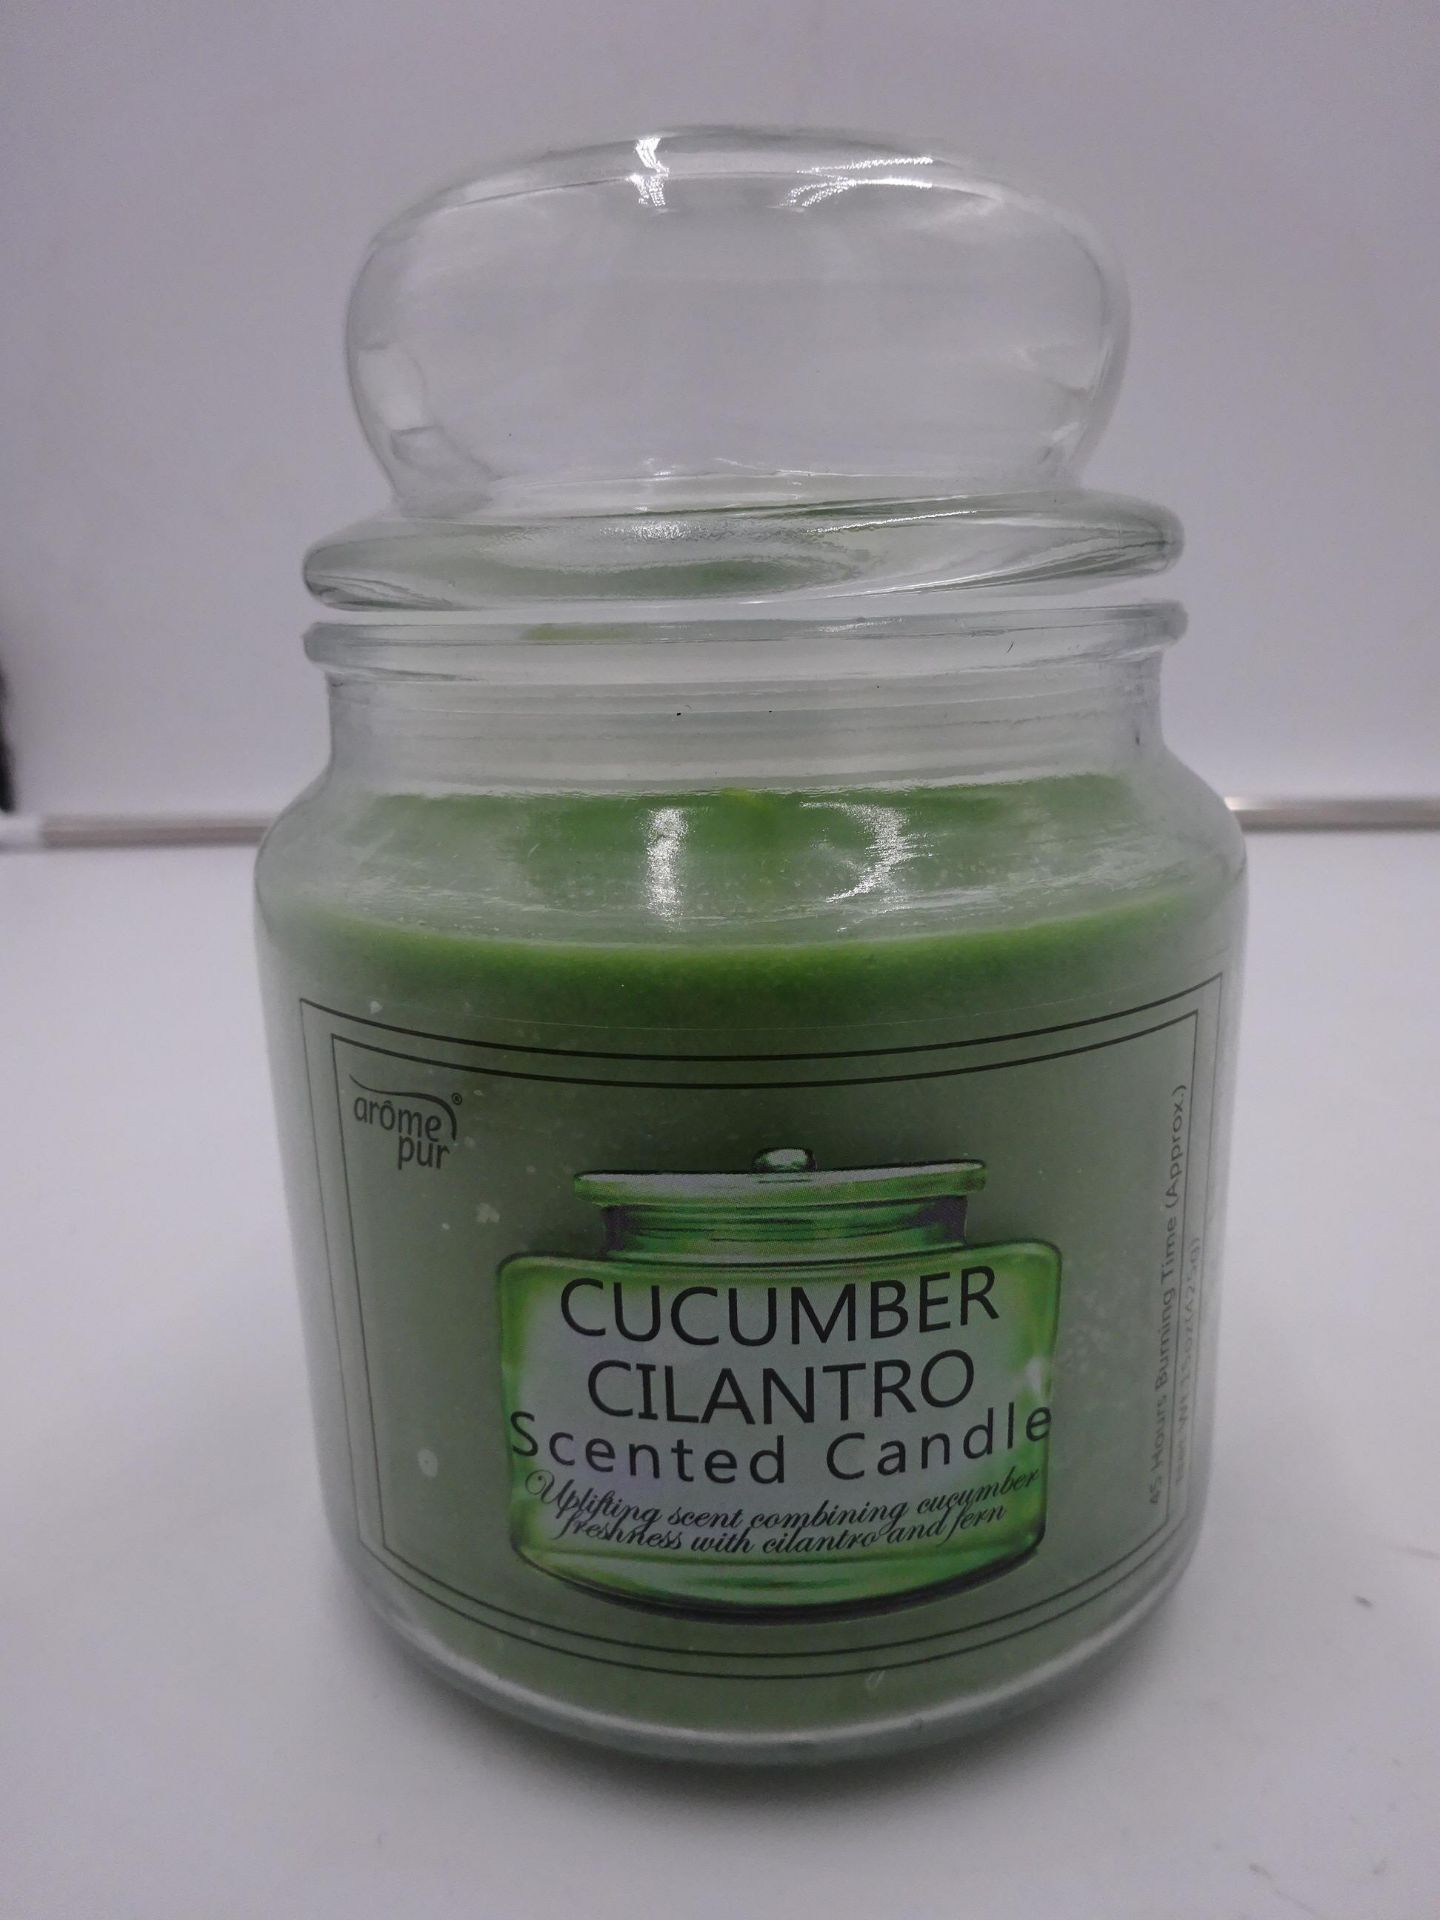 NEW CUCUMBER & CILANTO SCENTED CANDLE WITH 45 HOURS BURNING TIME